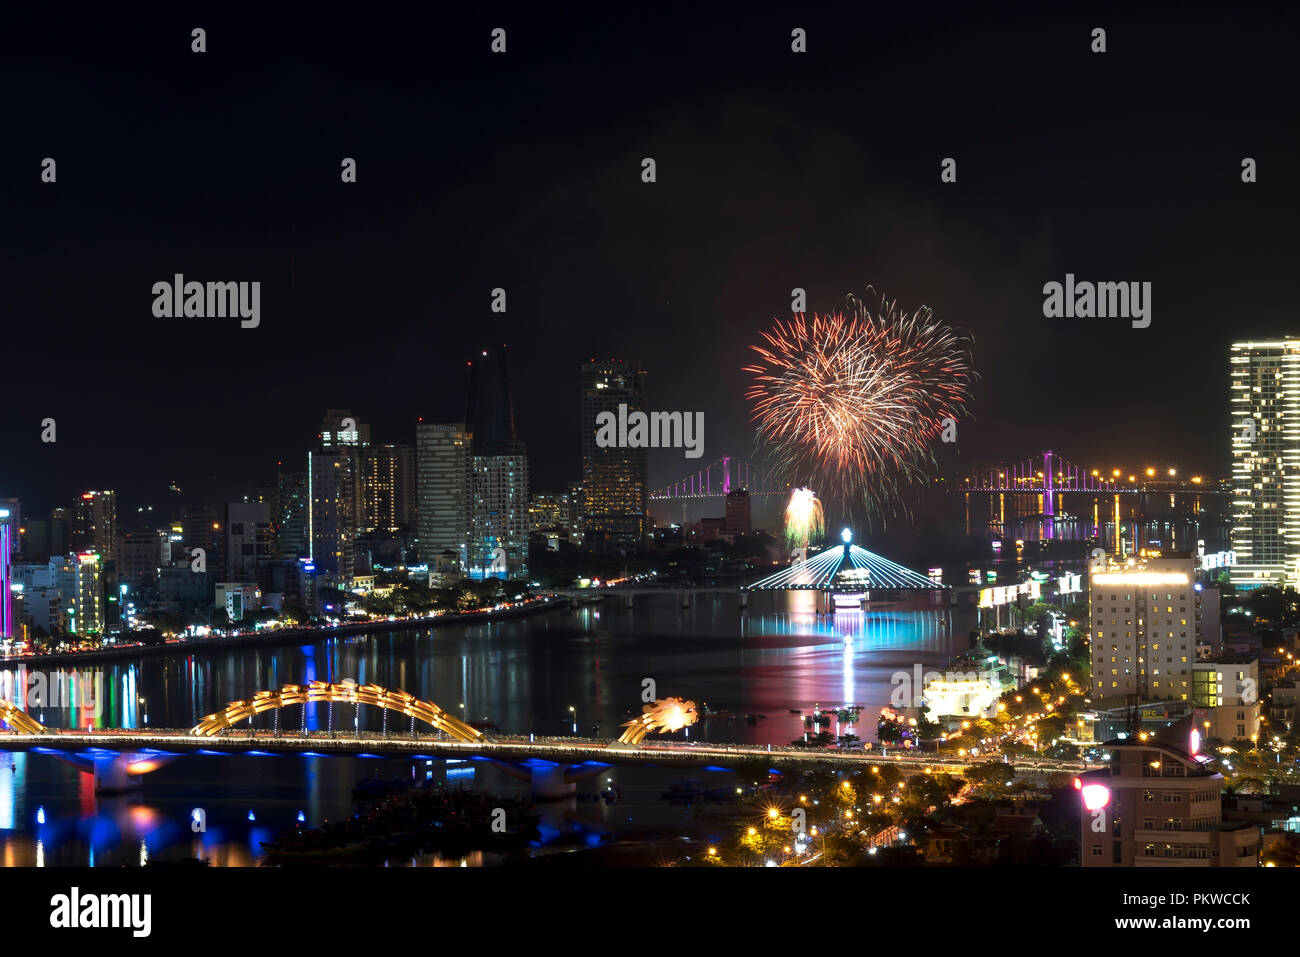 Da Nang international fireworks festival which is held for every year on Han the river in Da Nang city, Vietnam Stock Photo